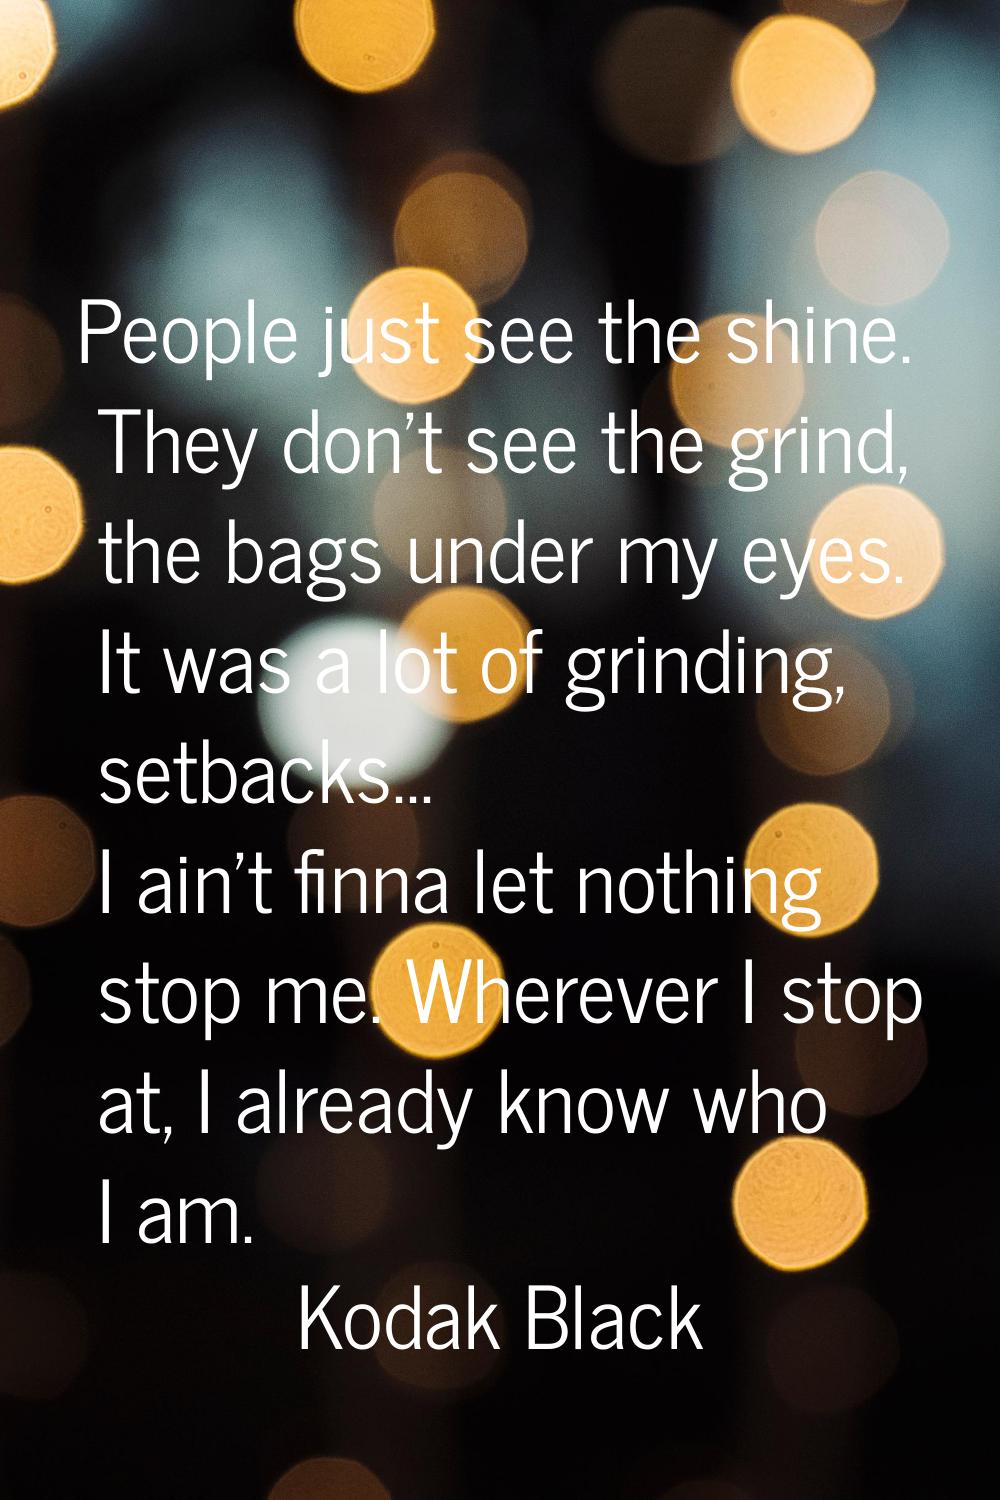 People just see the shine. They don't see the grind, the bags under my eyes. It was a lot of grindi